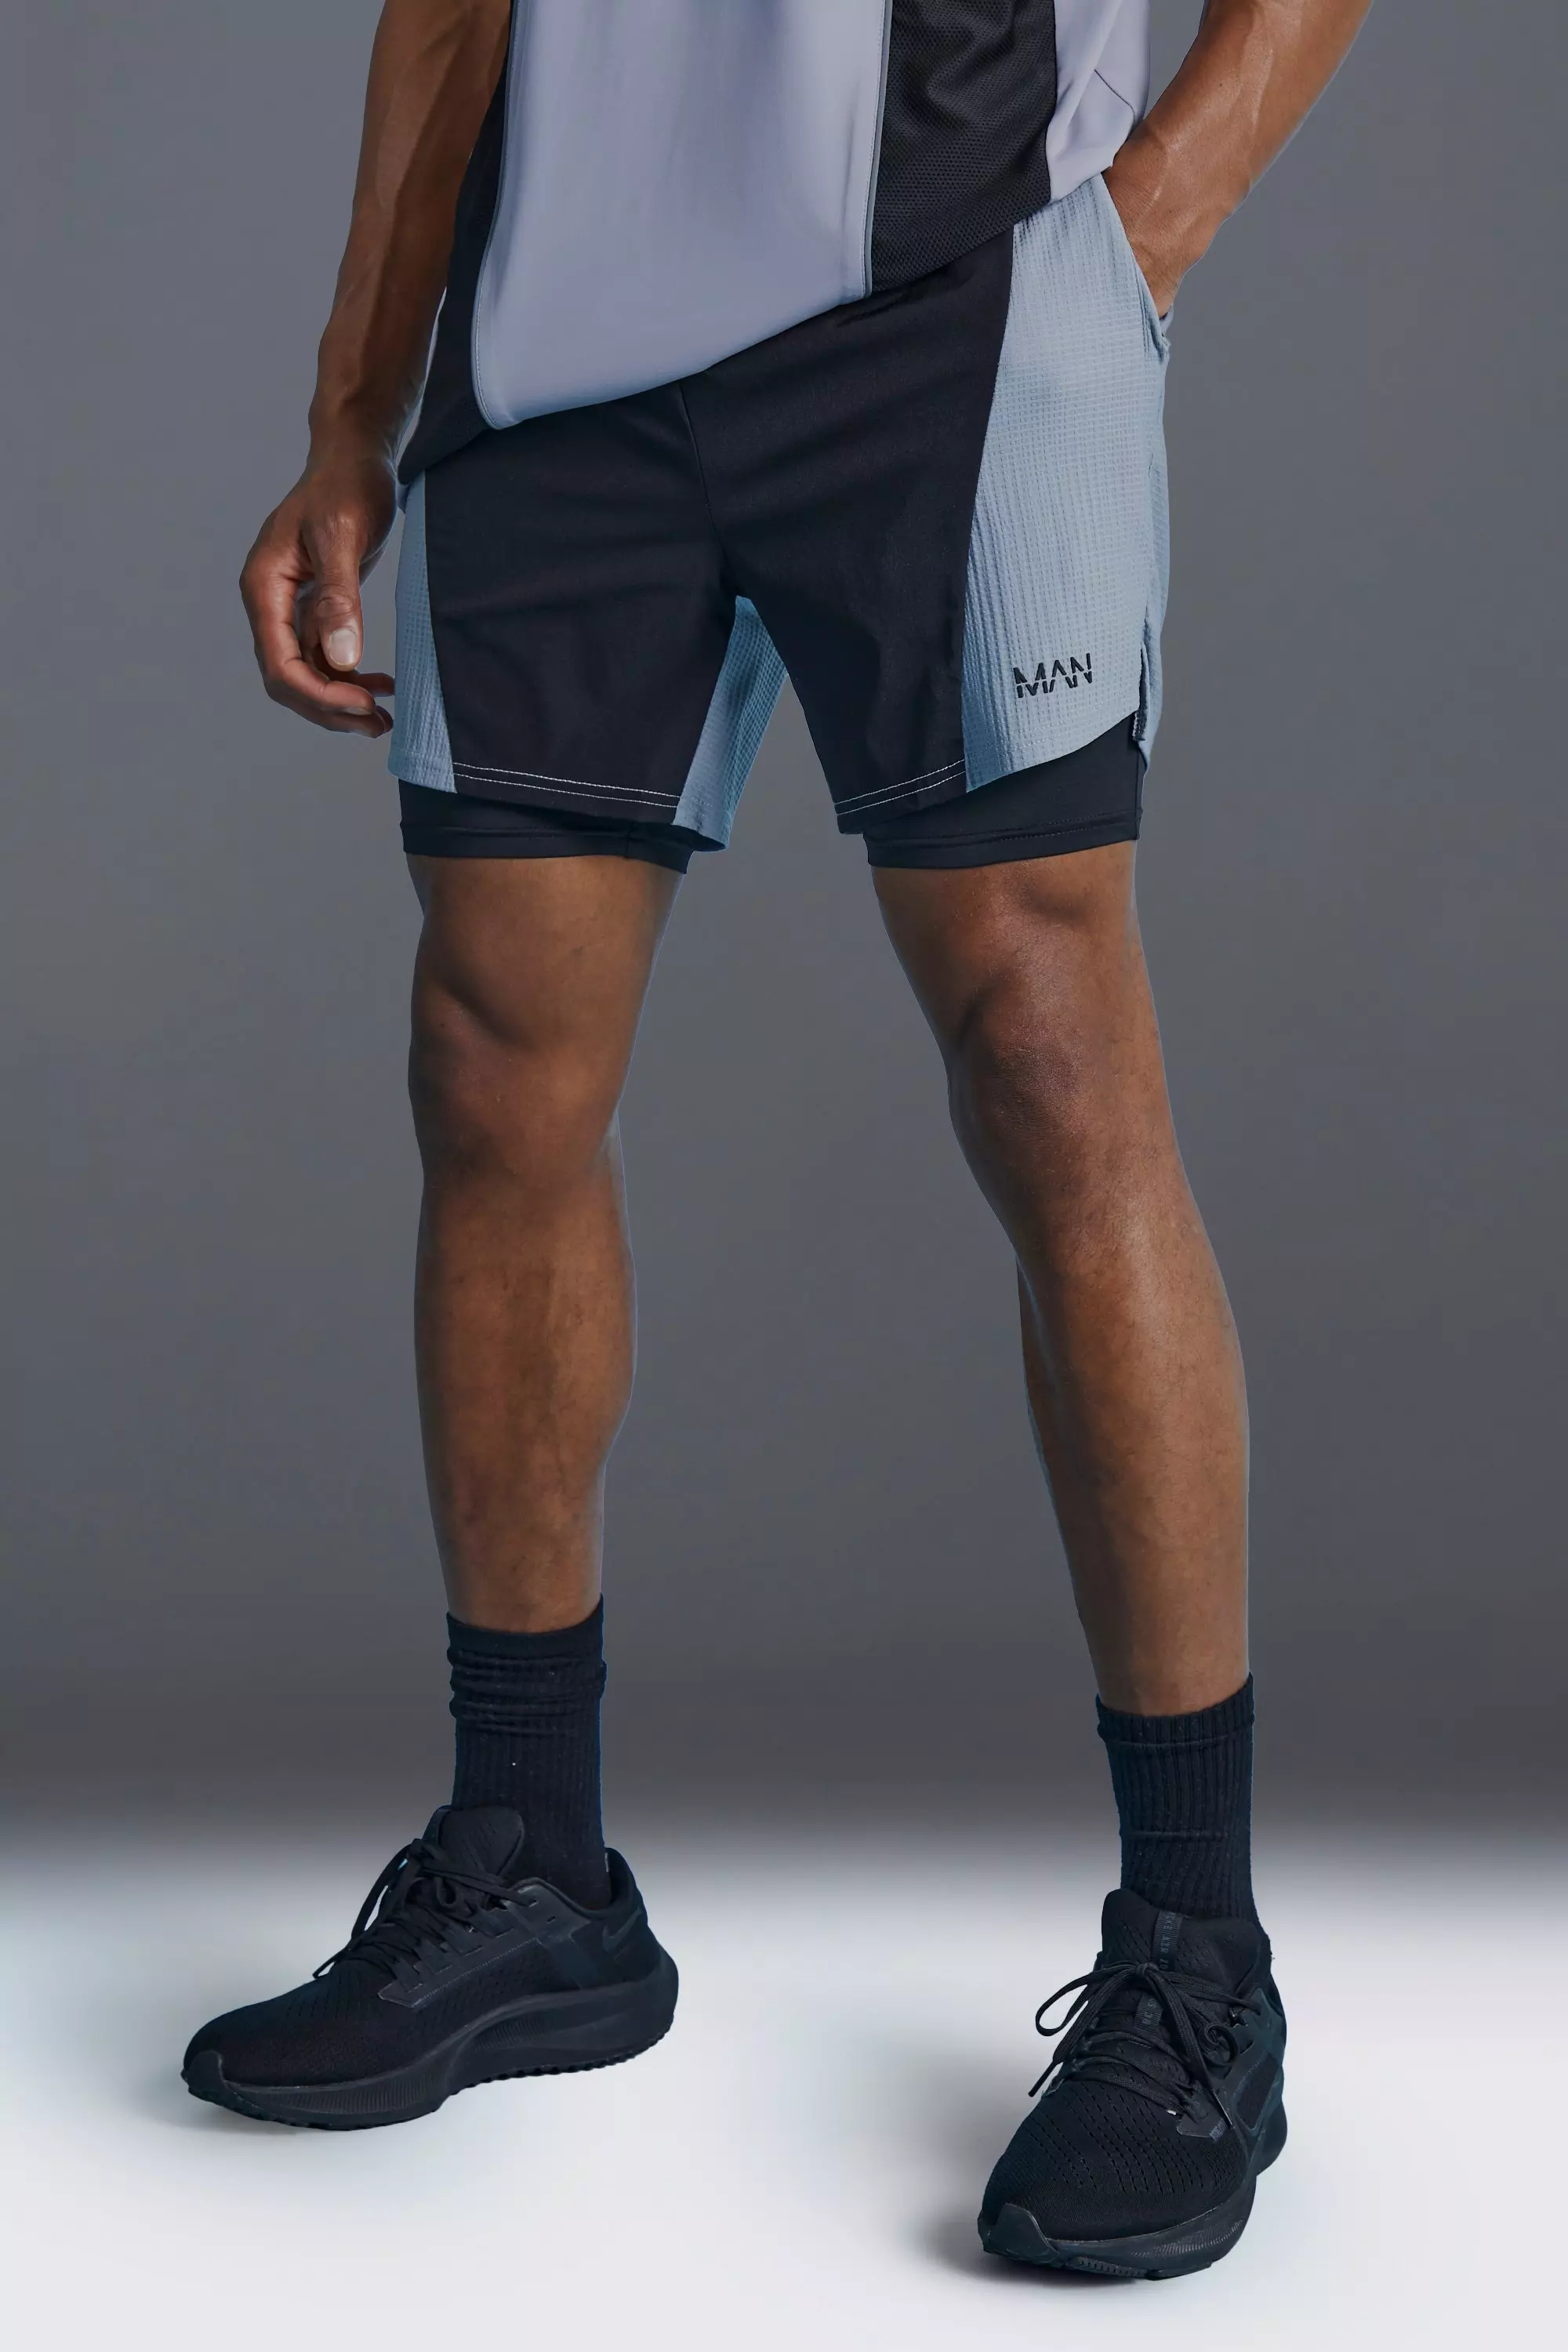 Man Active Colour Block 2-in-1 Short Charcoal